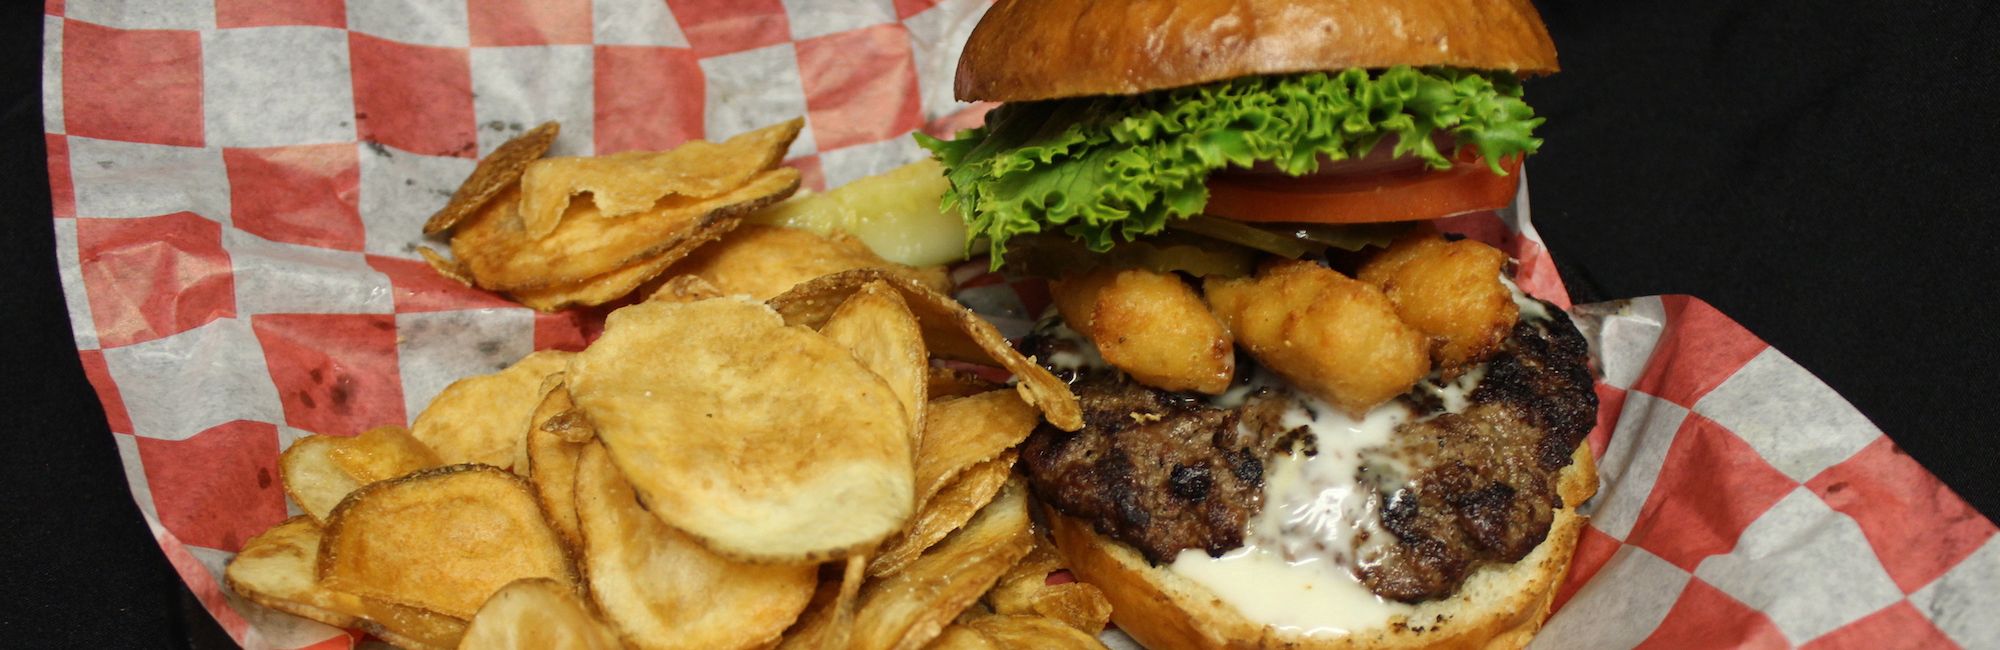 Beckett’s Burger Bar - The Best Place for Burgers in Bowling Green & Now Delivered to Your Door!